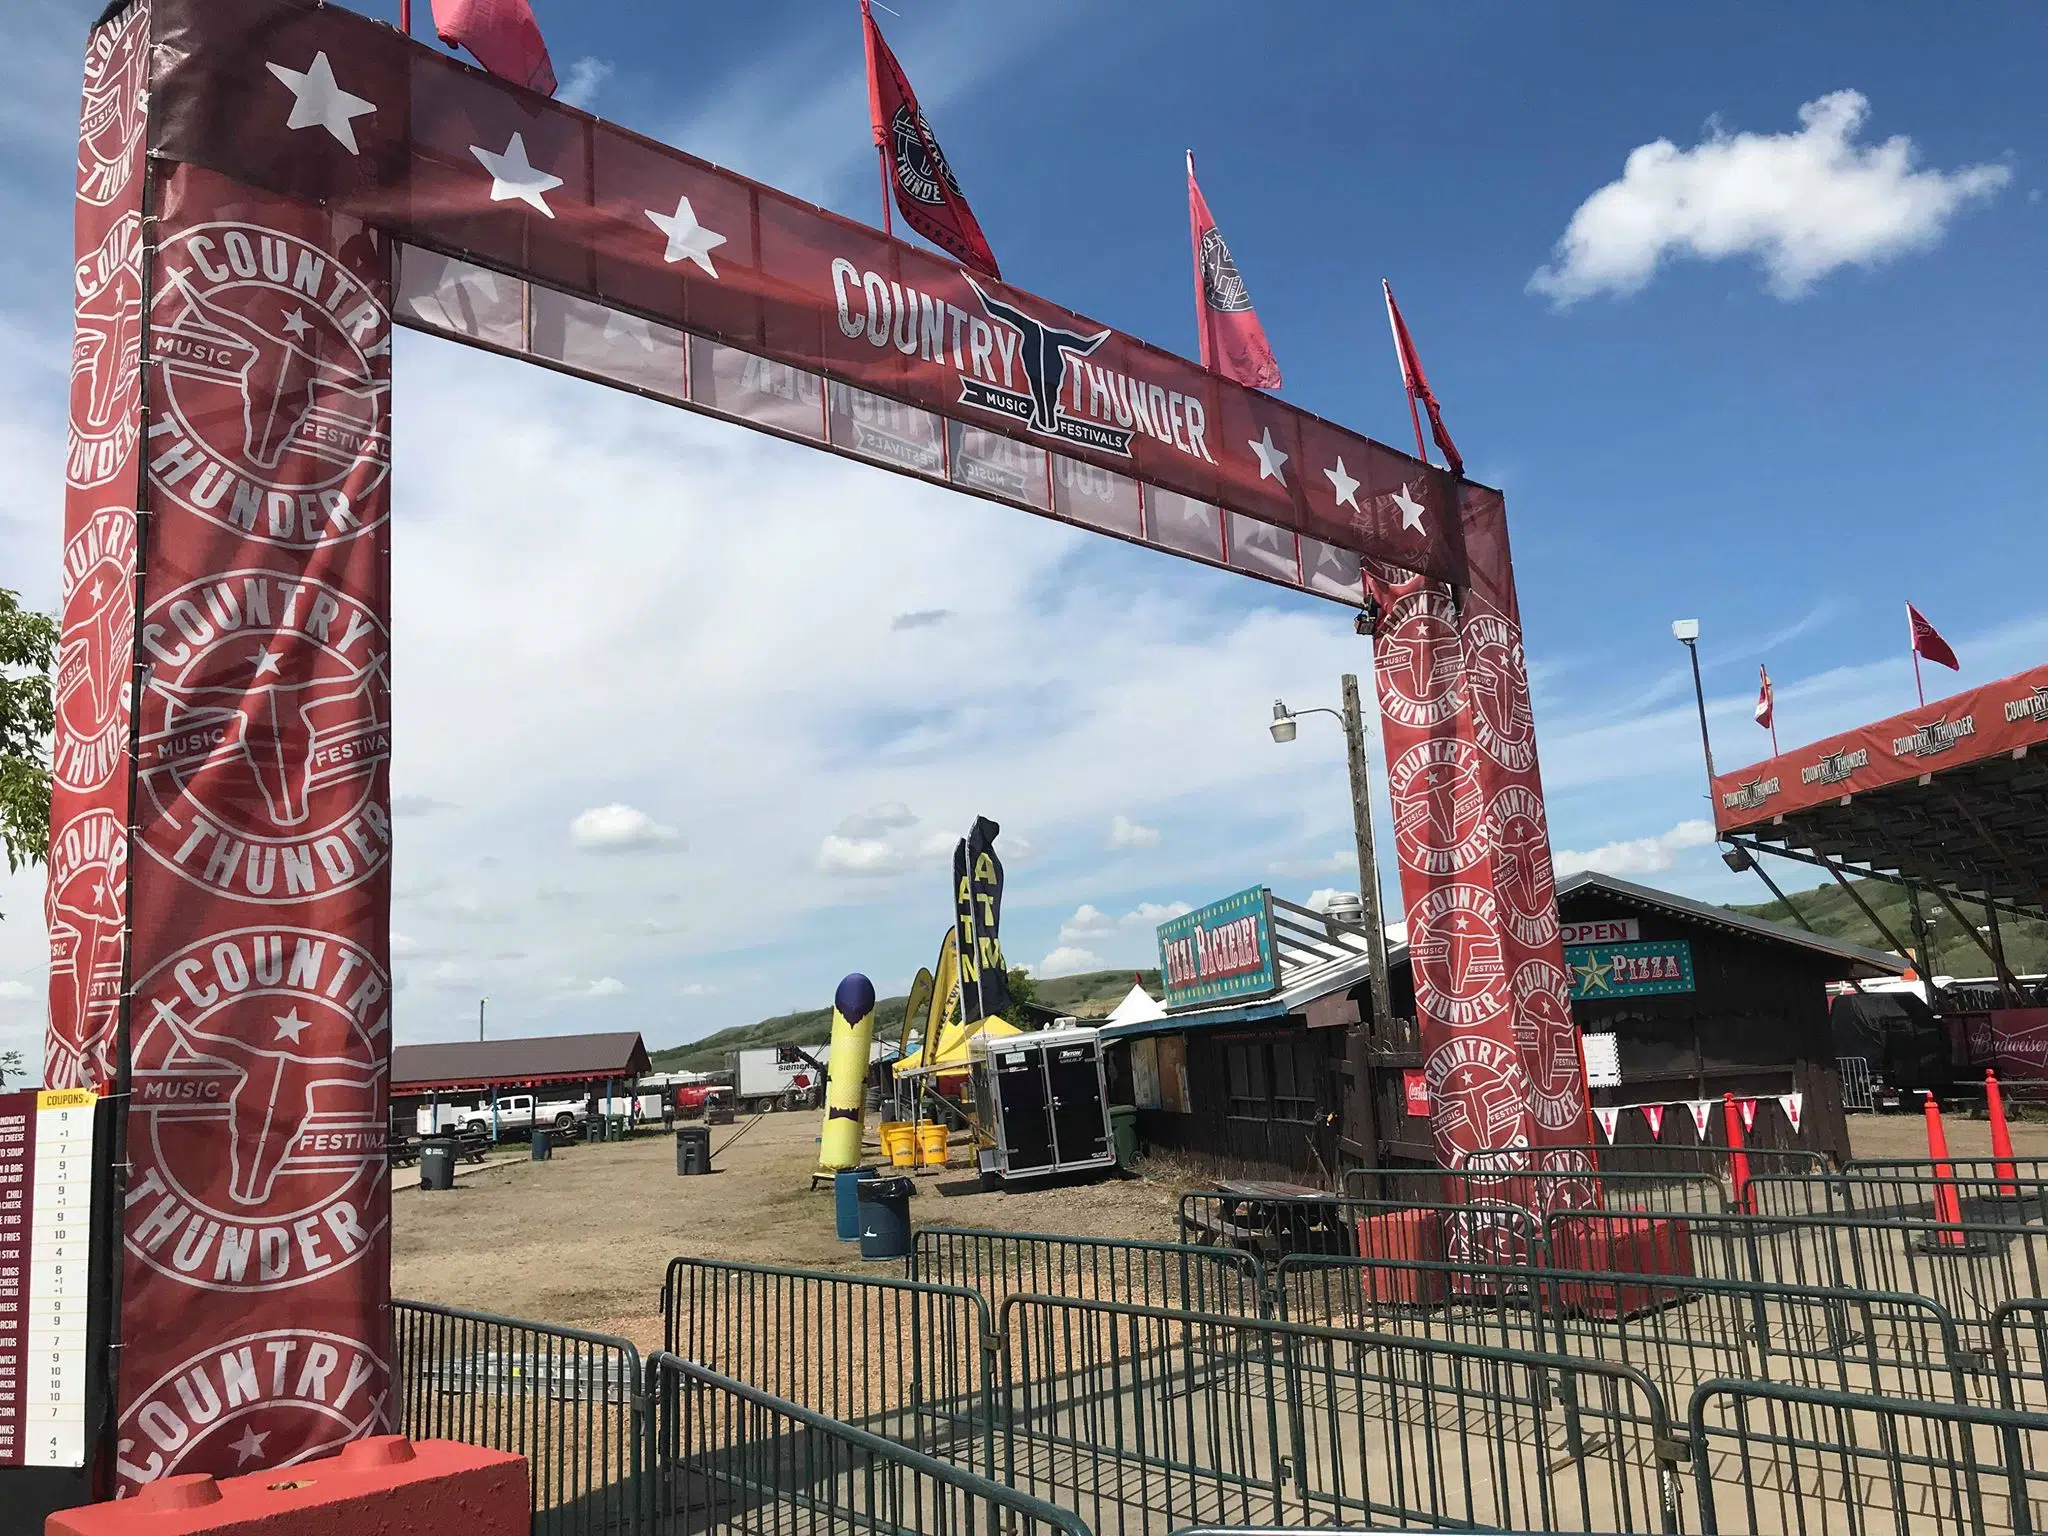 Country Thunder organizers taking wait-and-see approach